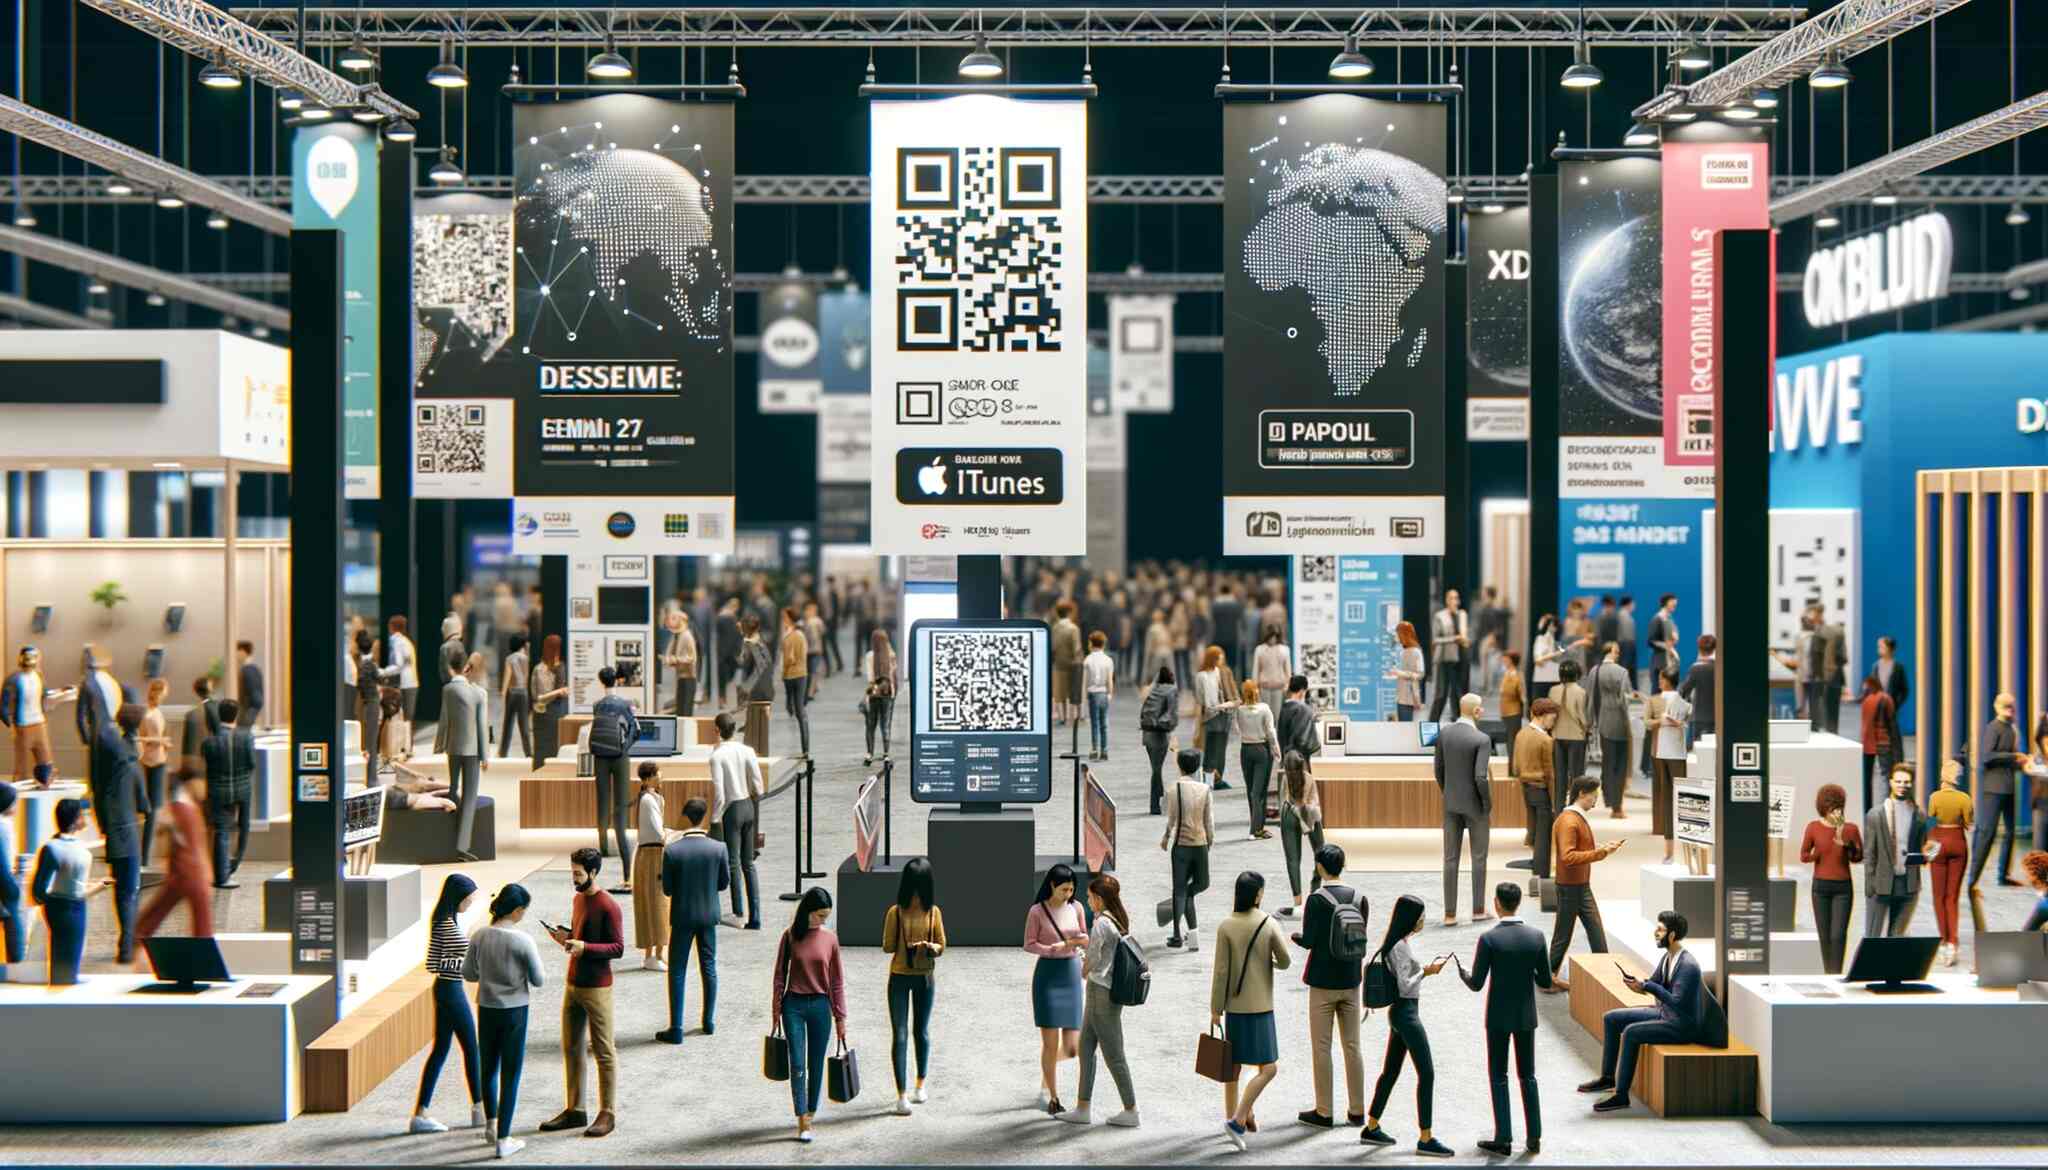  a bustling trade show scene with various promotional QR codes on banners